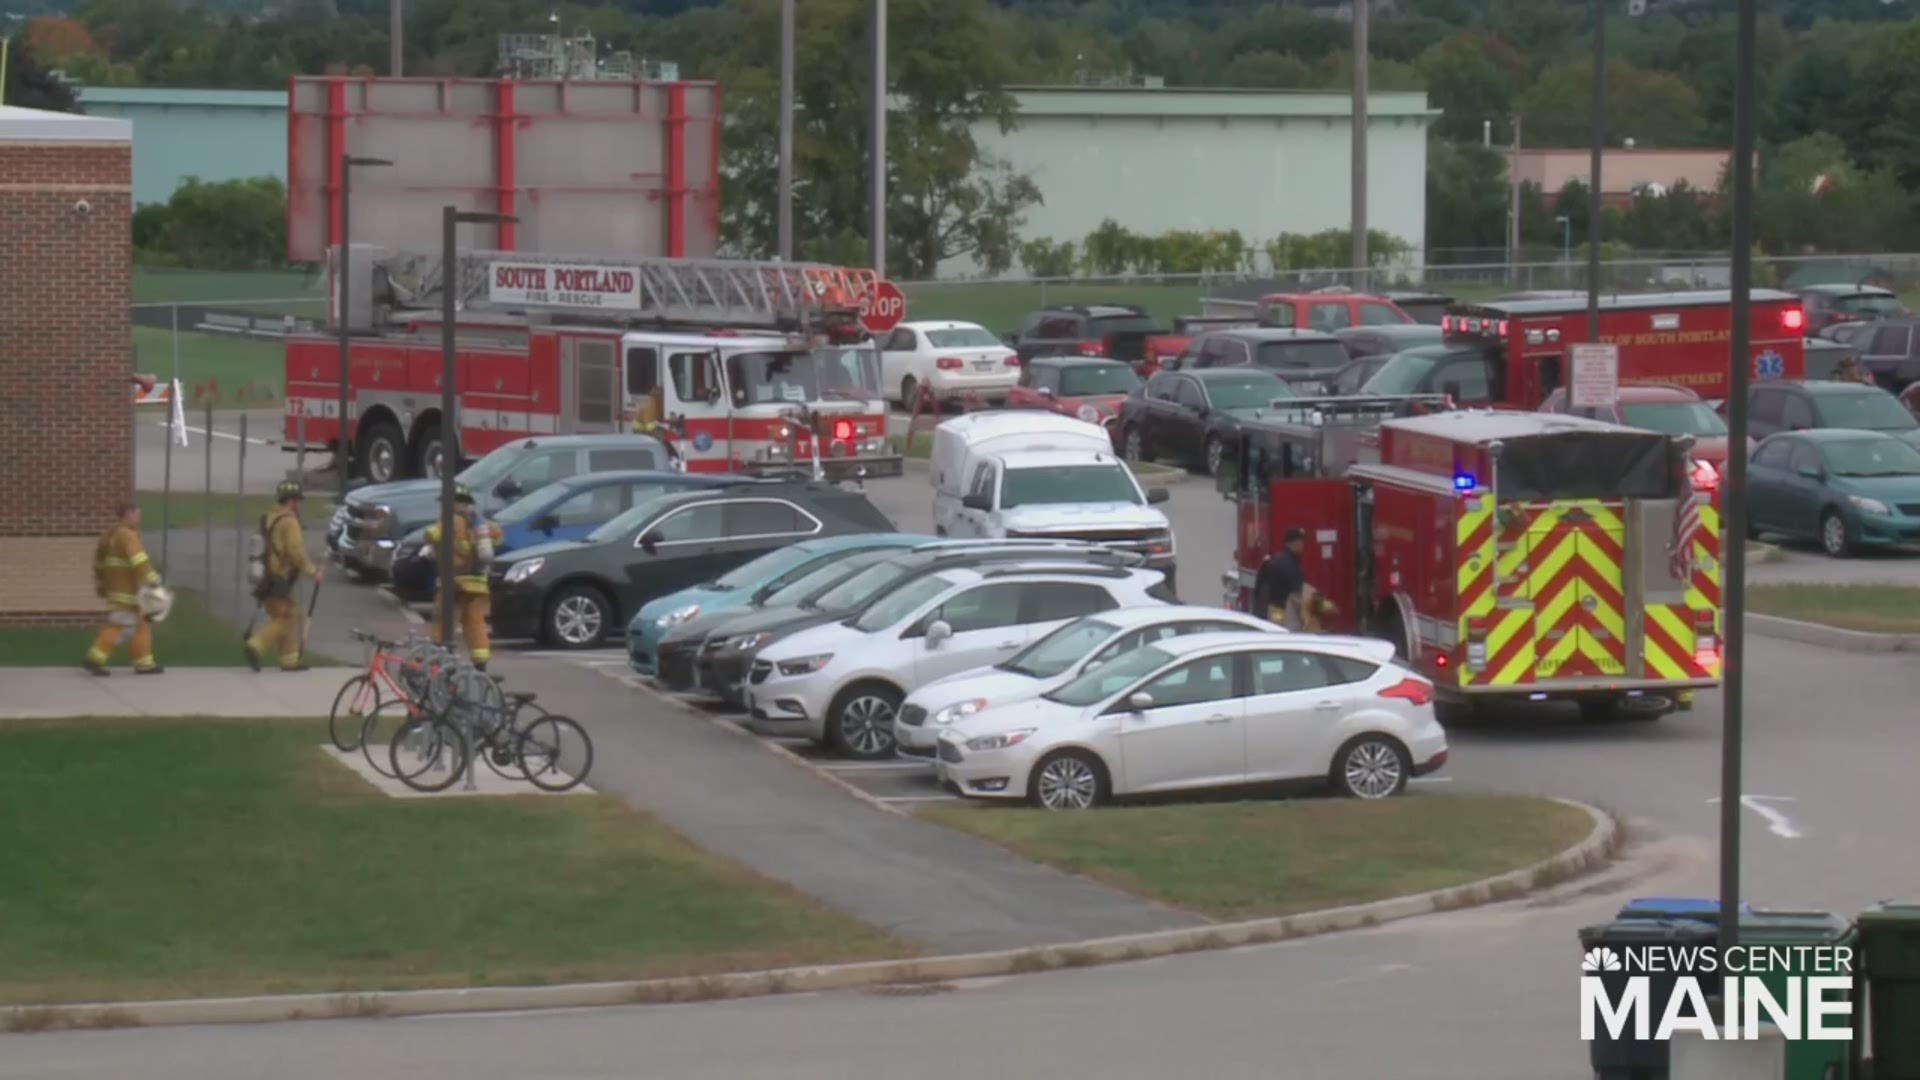 Reports of gas smells prompted officials to evacuate South Portland High School Wednesday morning.